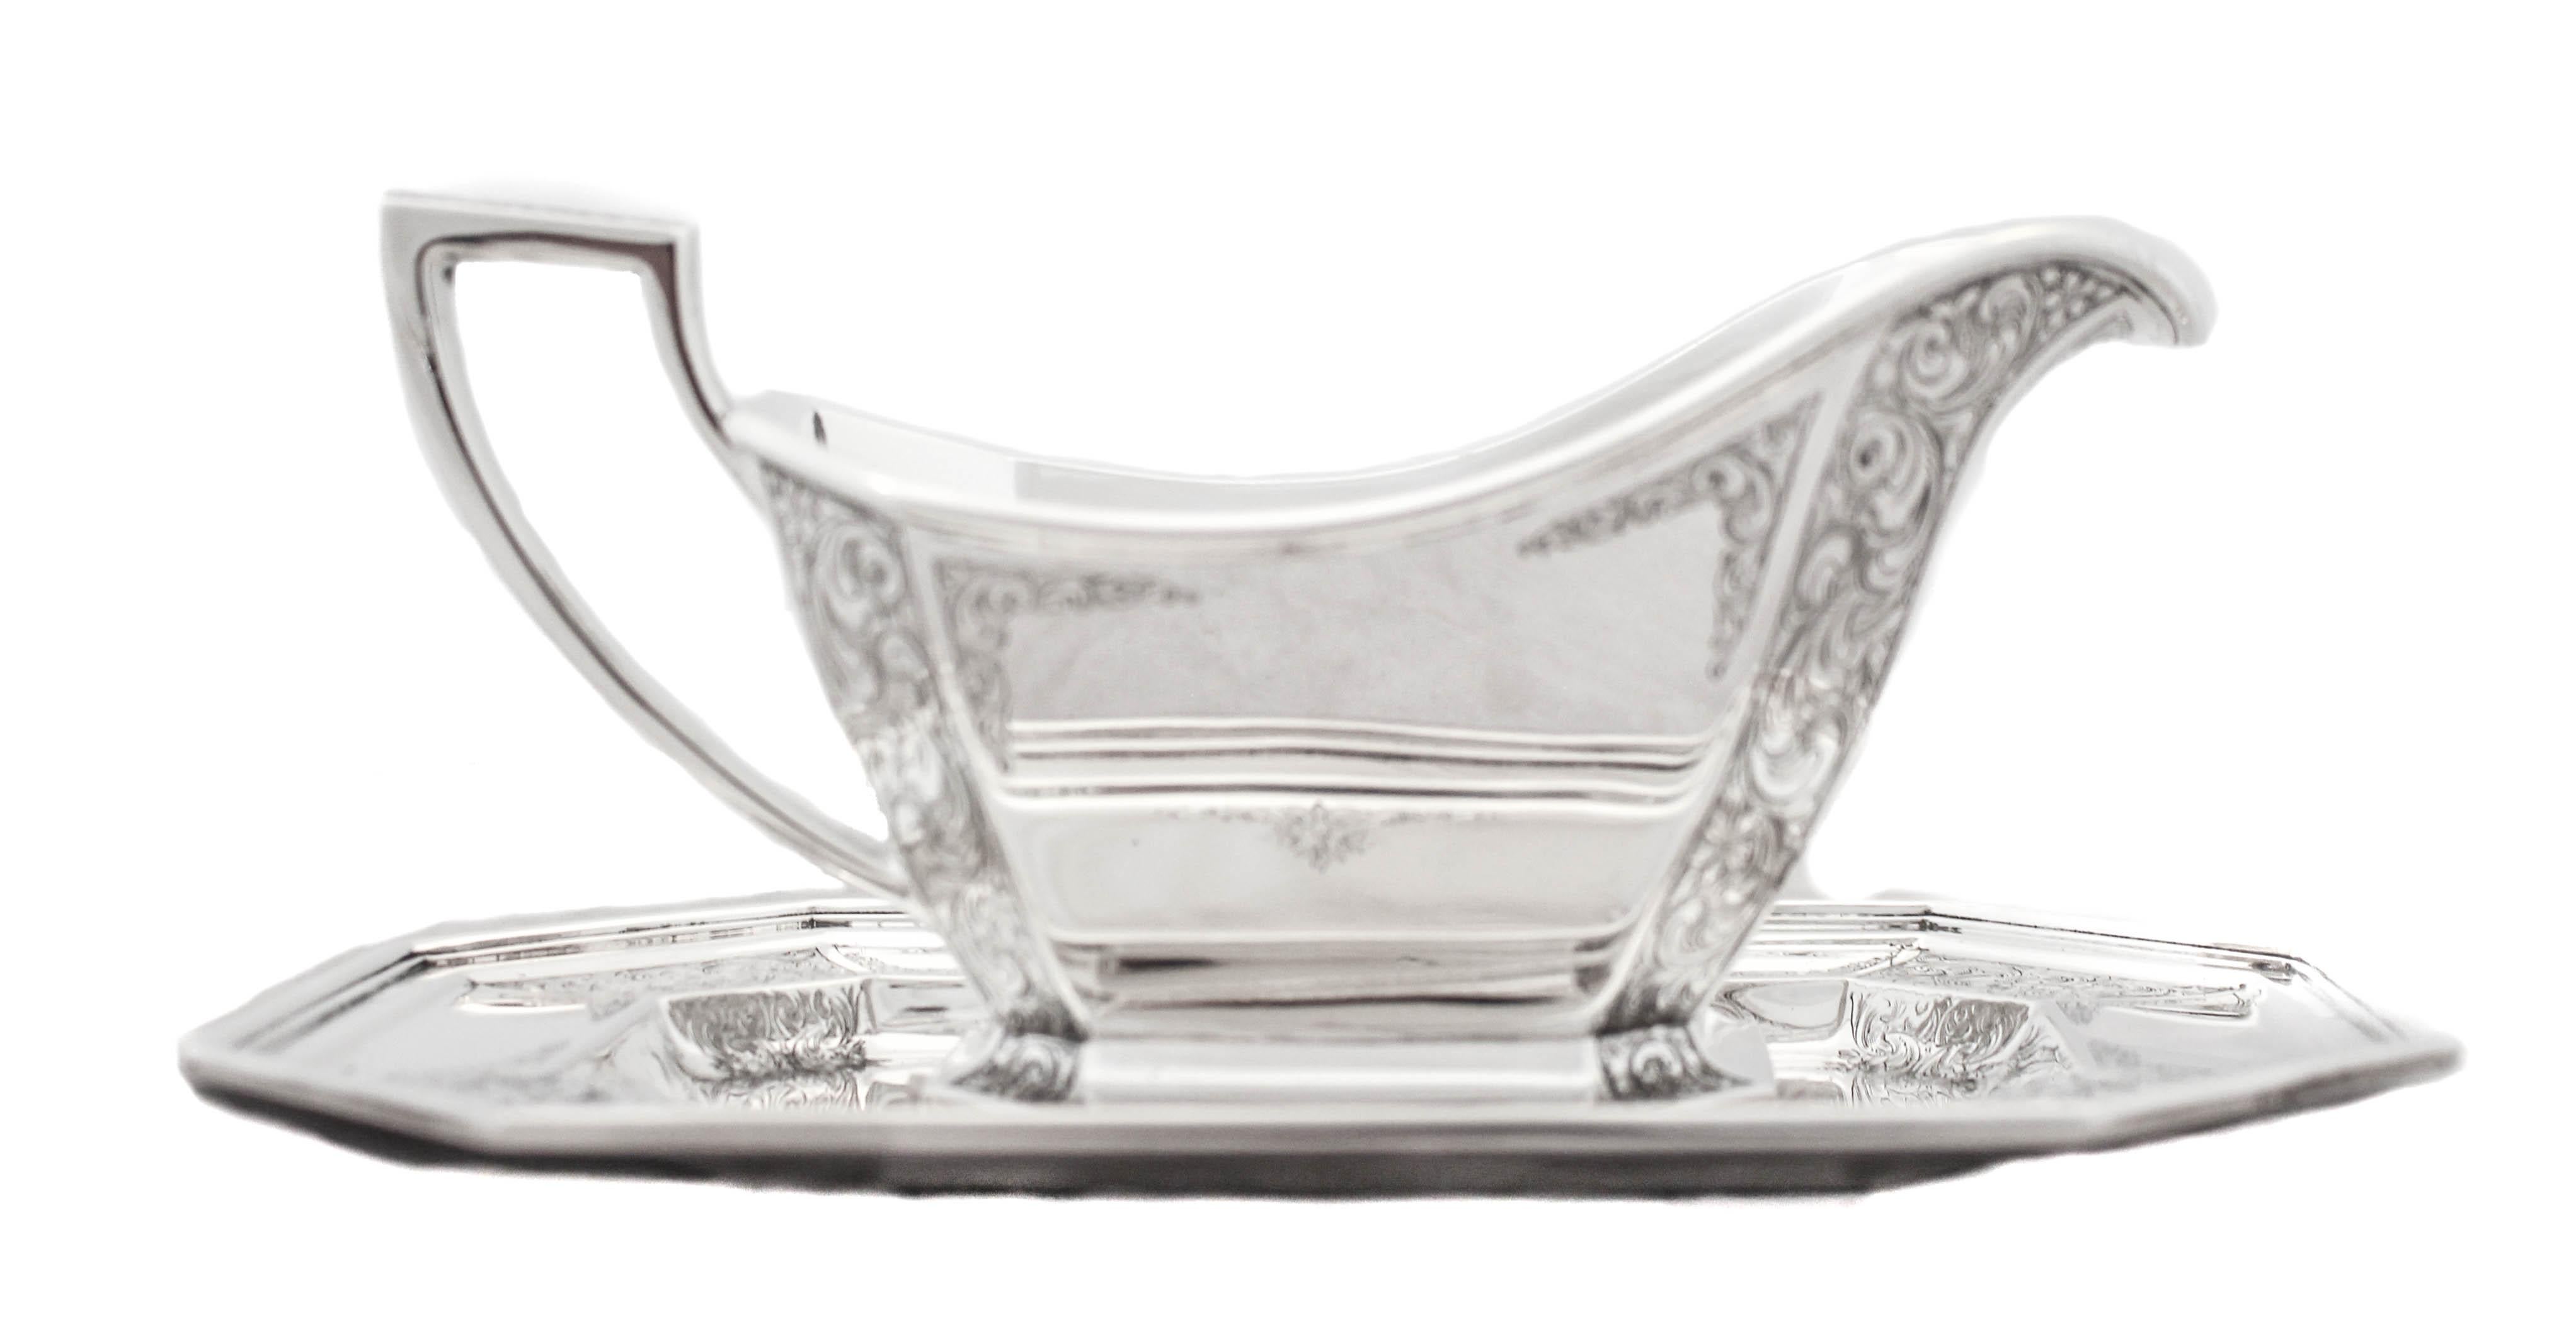 Being offered is a sterling silver gravy boat and tray by William Durgin Silversmiths in the Fairfax pattern. 
It has etching on the handle as well as on the corner panels — both on the boat and tray. Both pieces are eight sided (polygon) which is